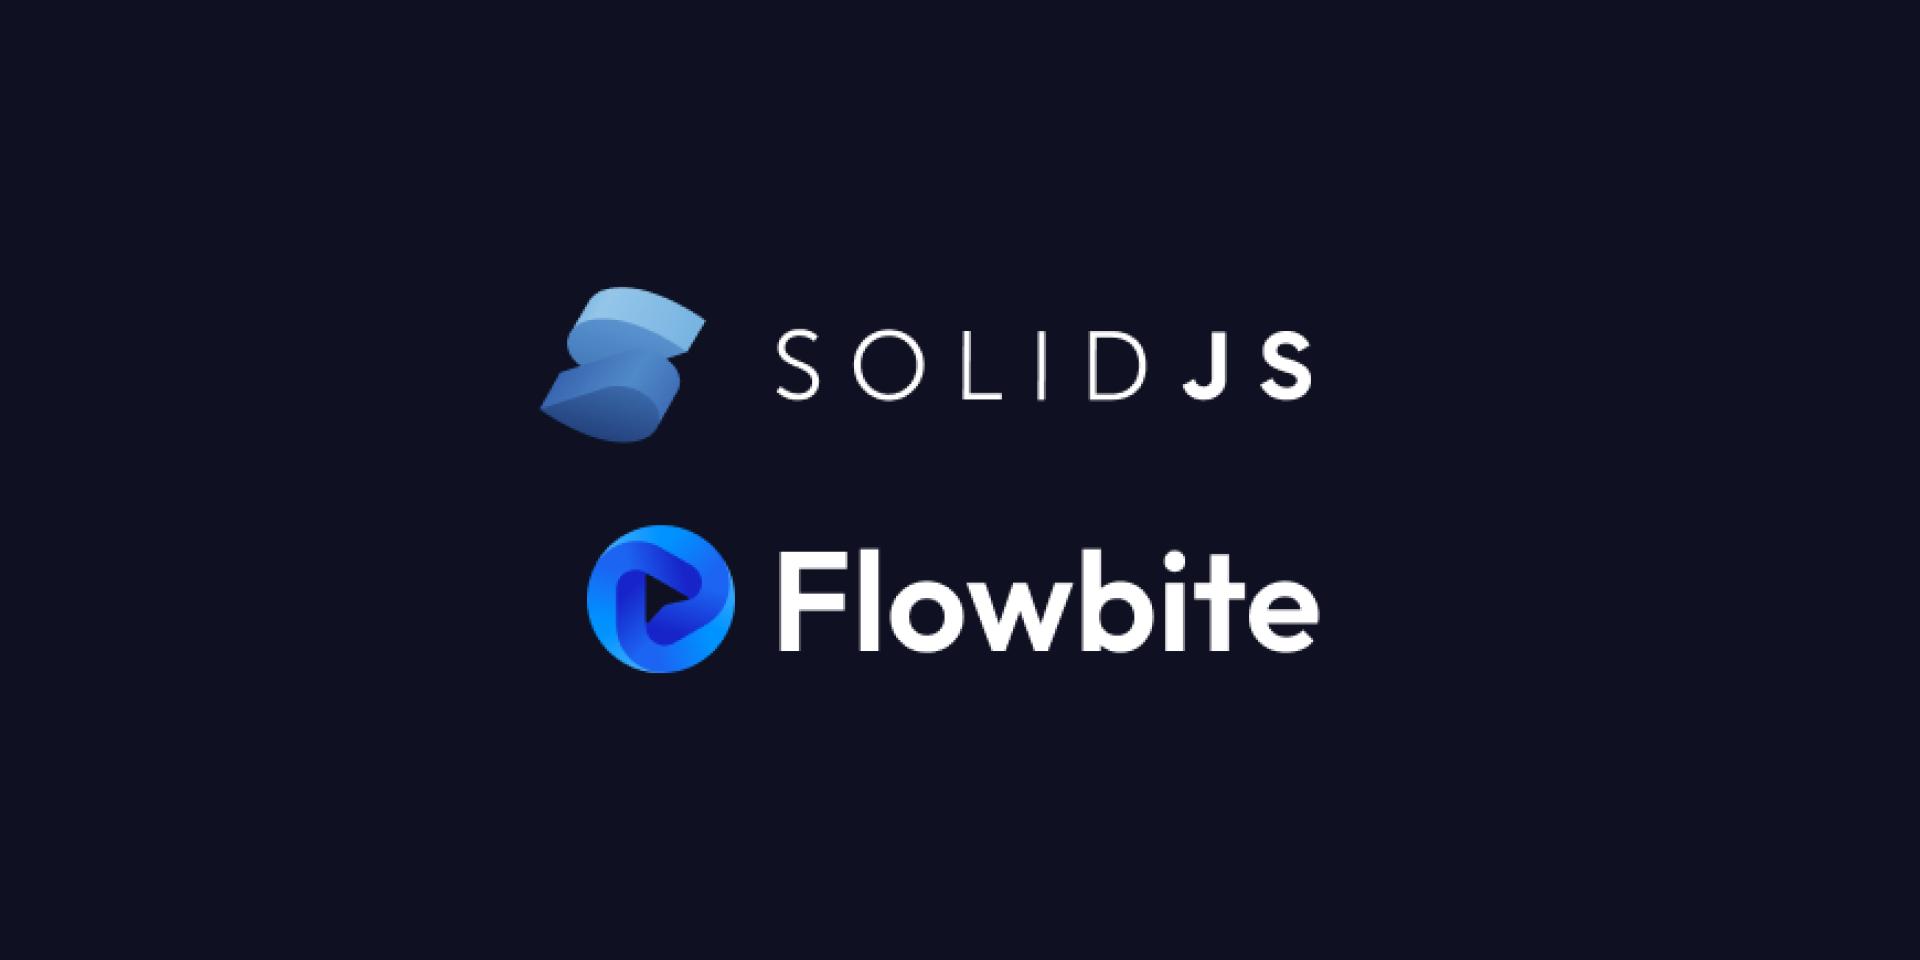 Learn how to install SolidJS with Flowbite and Tailwind CSS